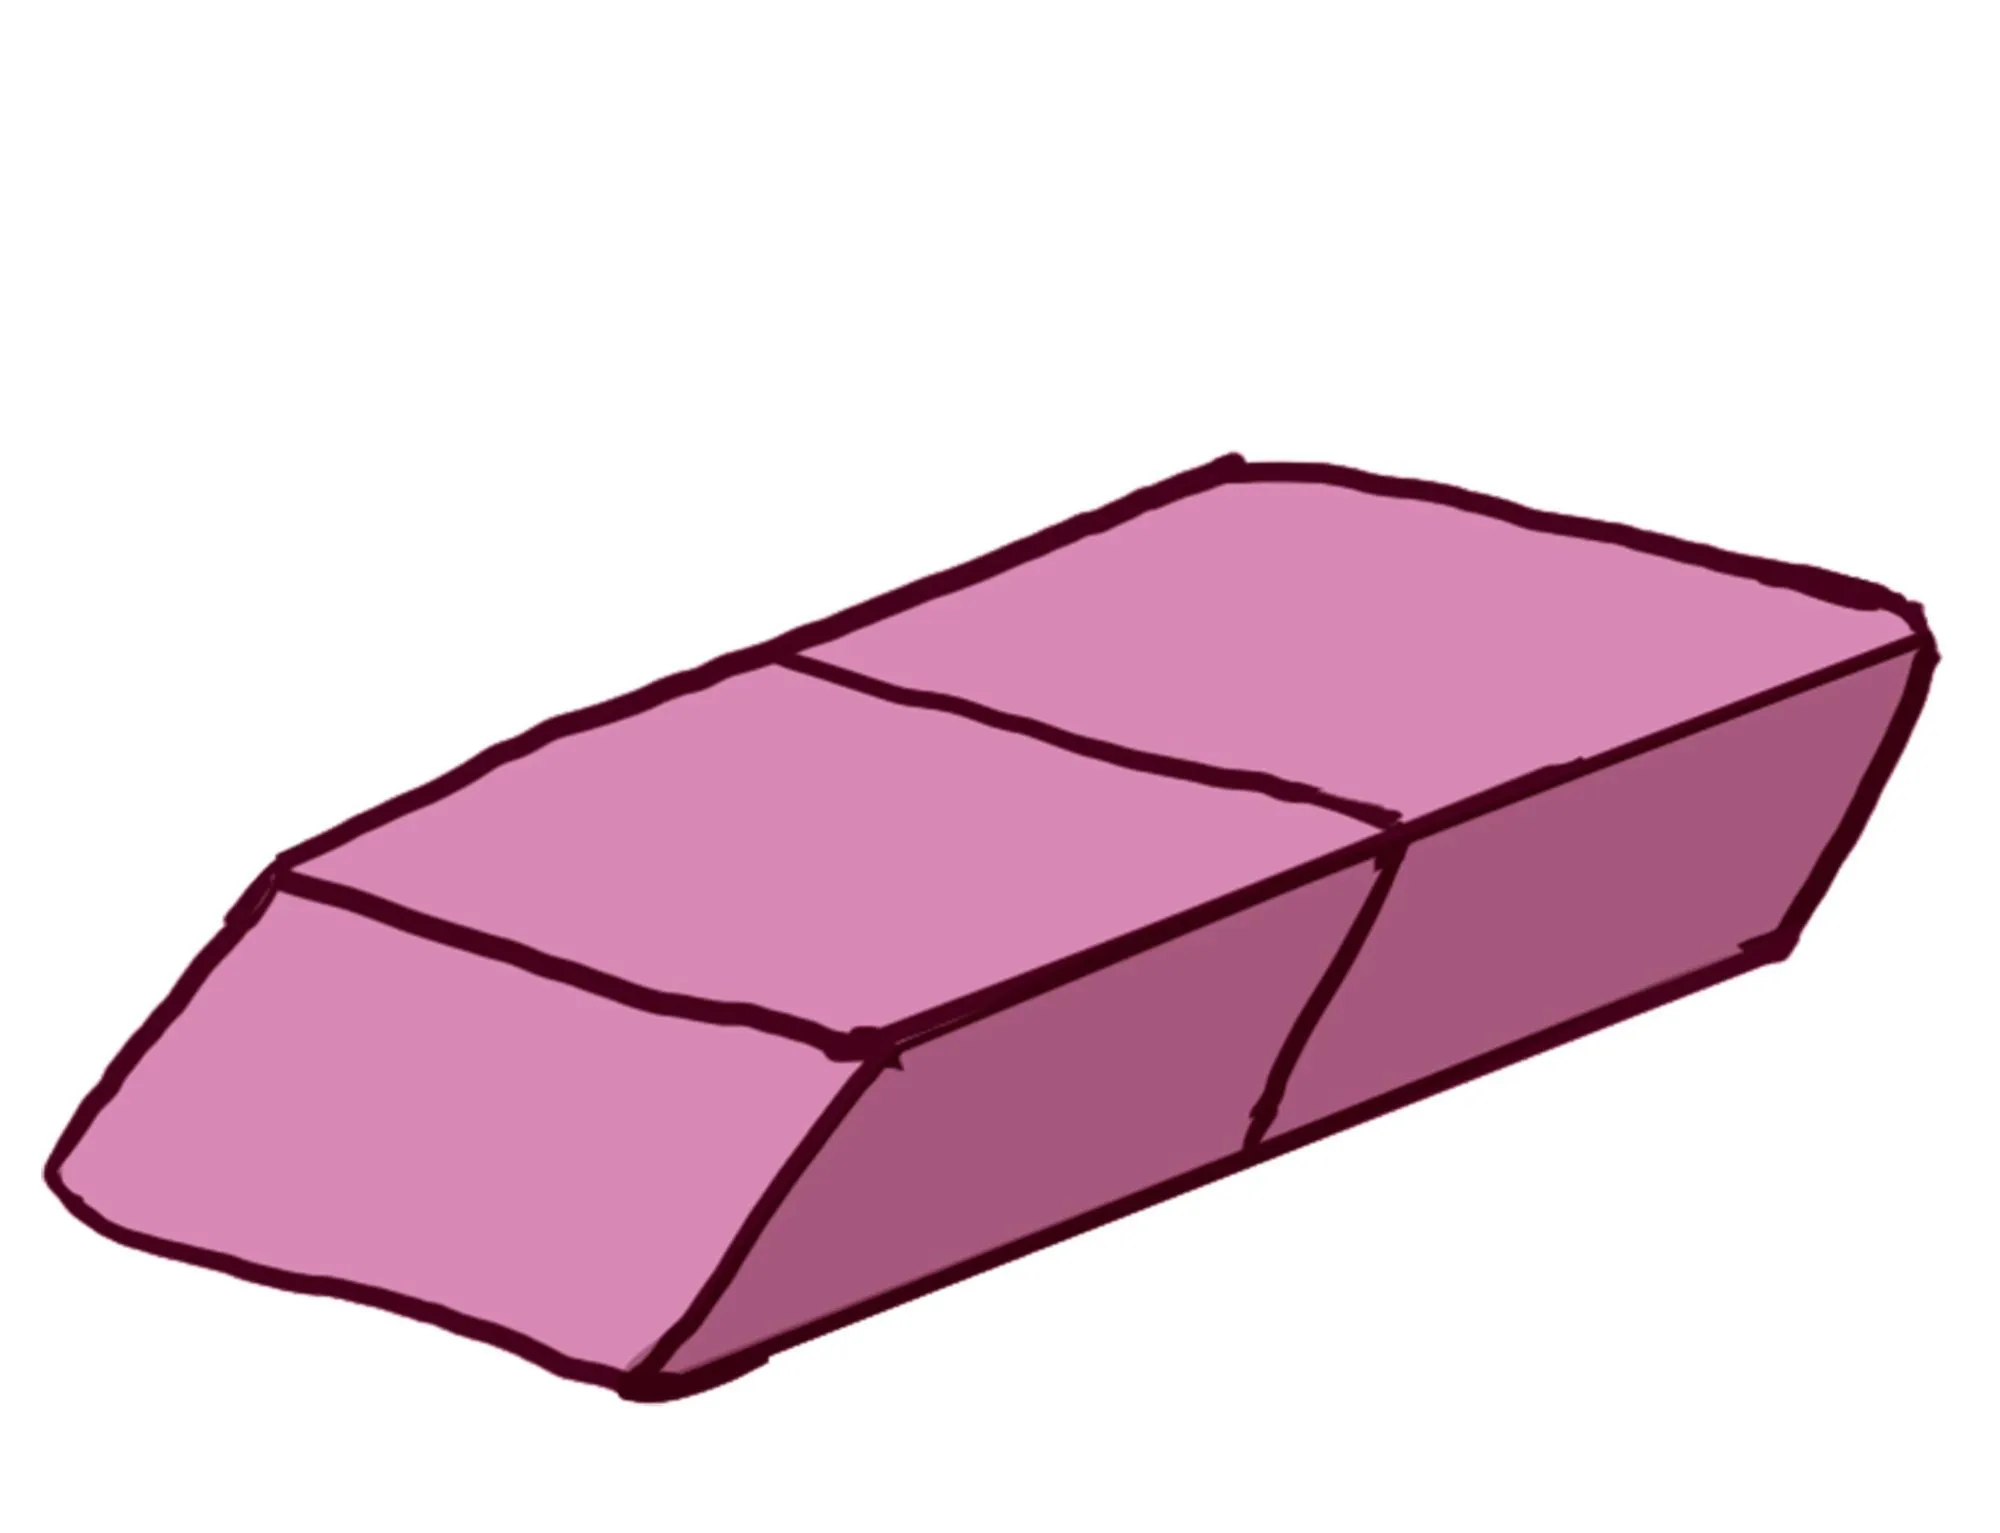 A pink rubber